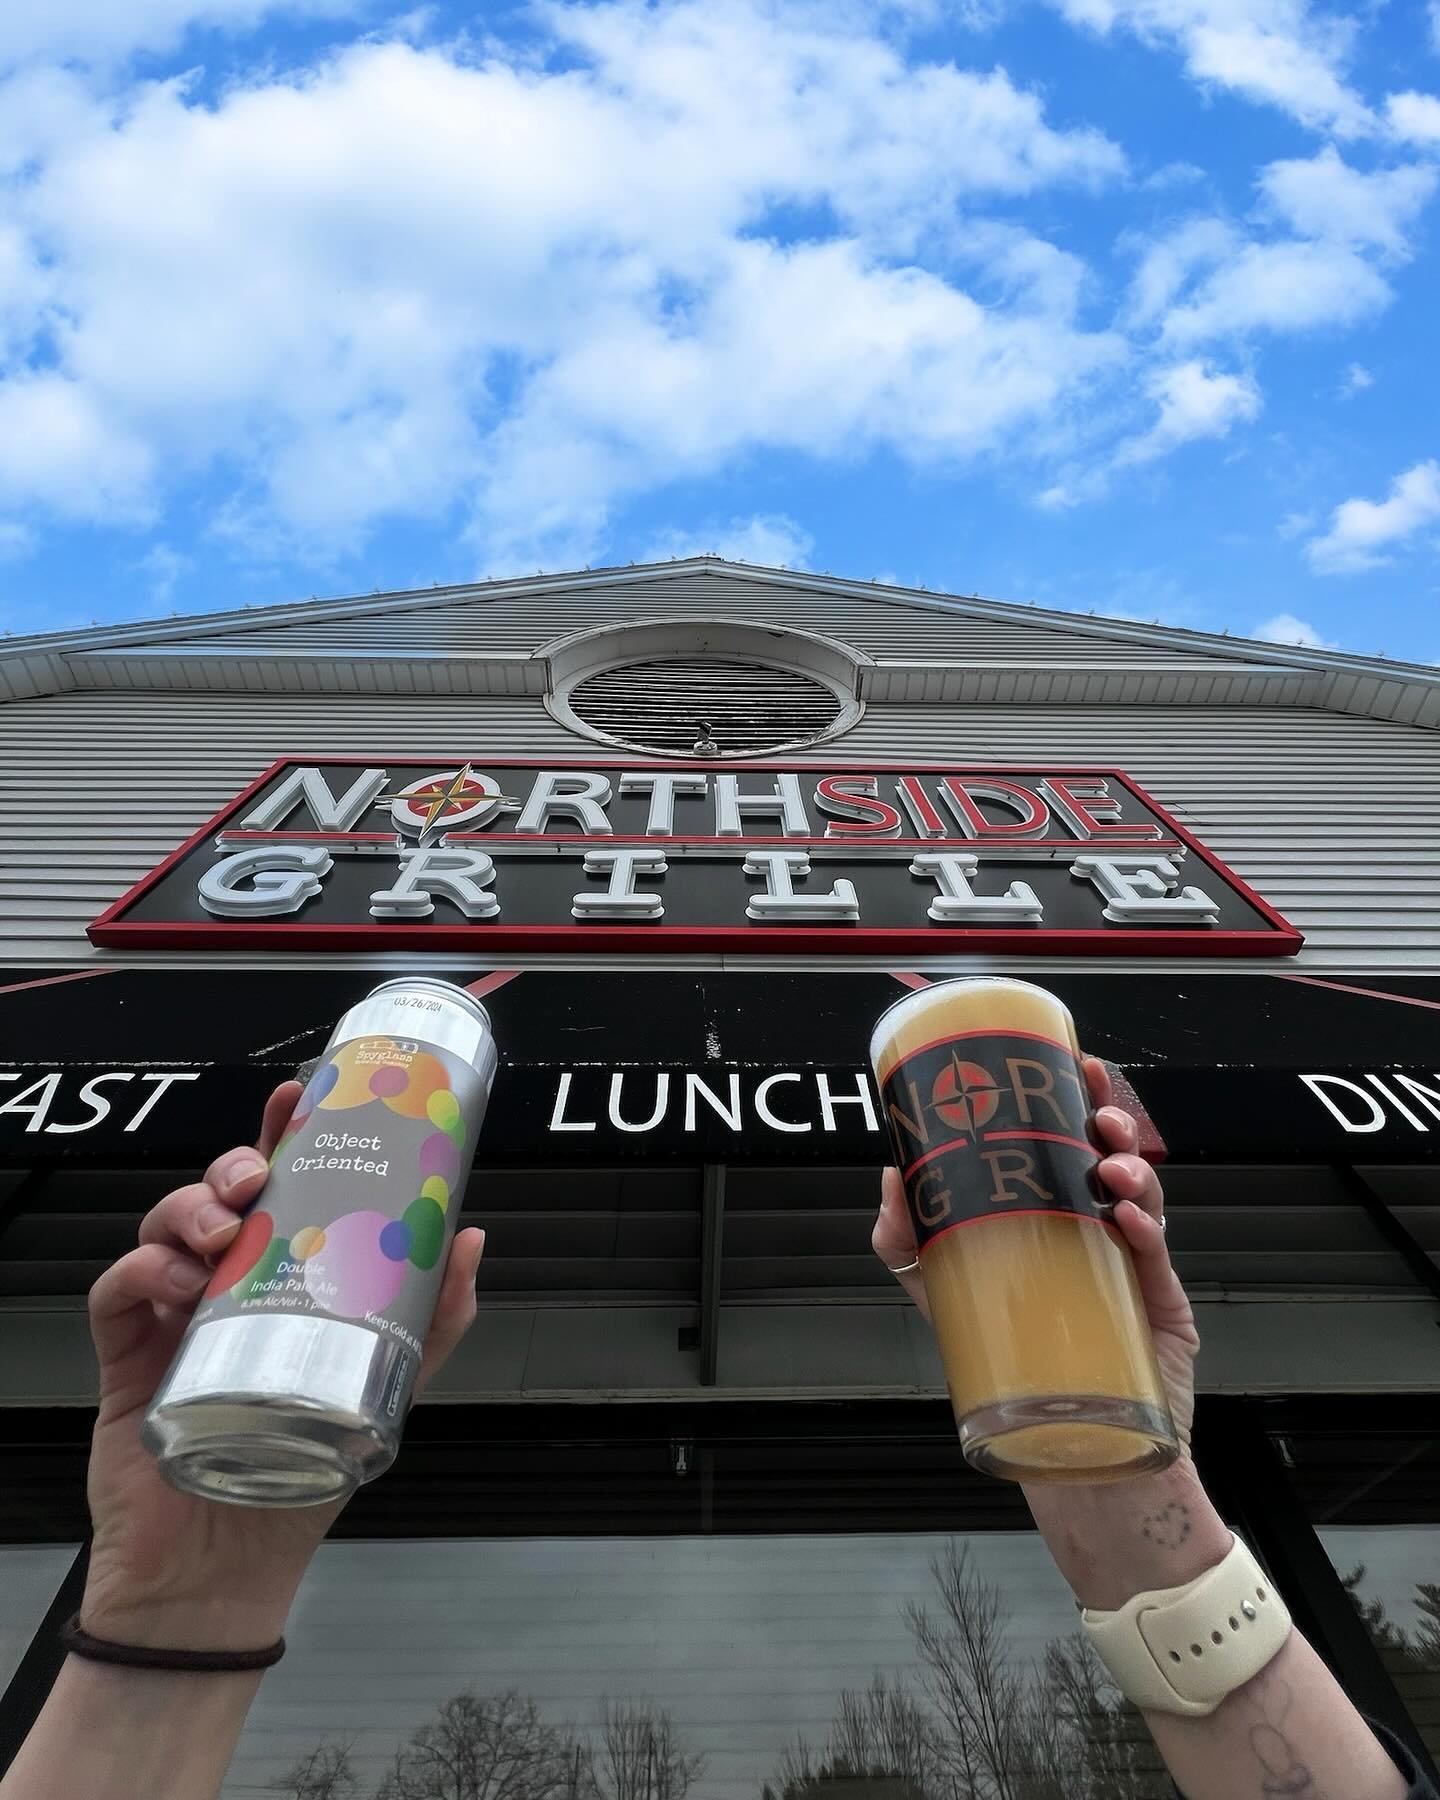 Find Object Oriented at the @northsidegrille! 

Located in Hudson, NH and serving up Breakfast, Lunch &amp; Dinner 6 days a week (closed Mondays). The North Side Grille is your local neighborhood restaurant and bar. Their menus are based on simple Am